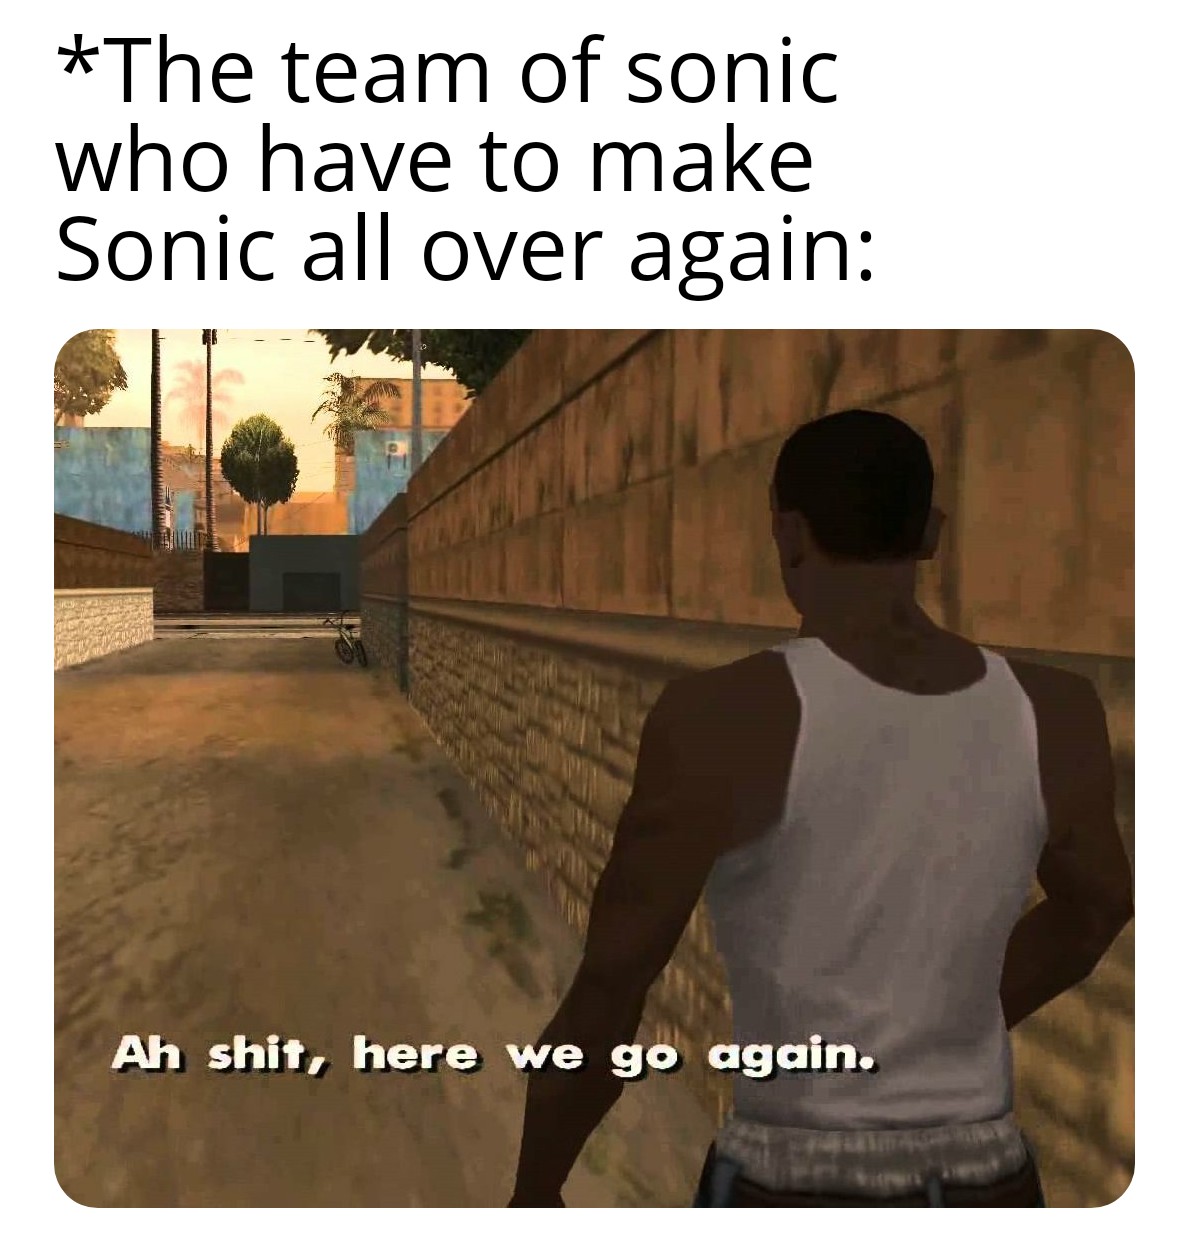 meme Sonic Movie Redesign memes - oh shit here we go again - The team of sonic who have to make Sonic all over again Ah shit, here we go again.